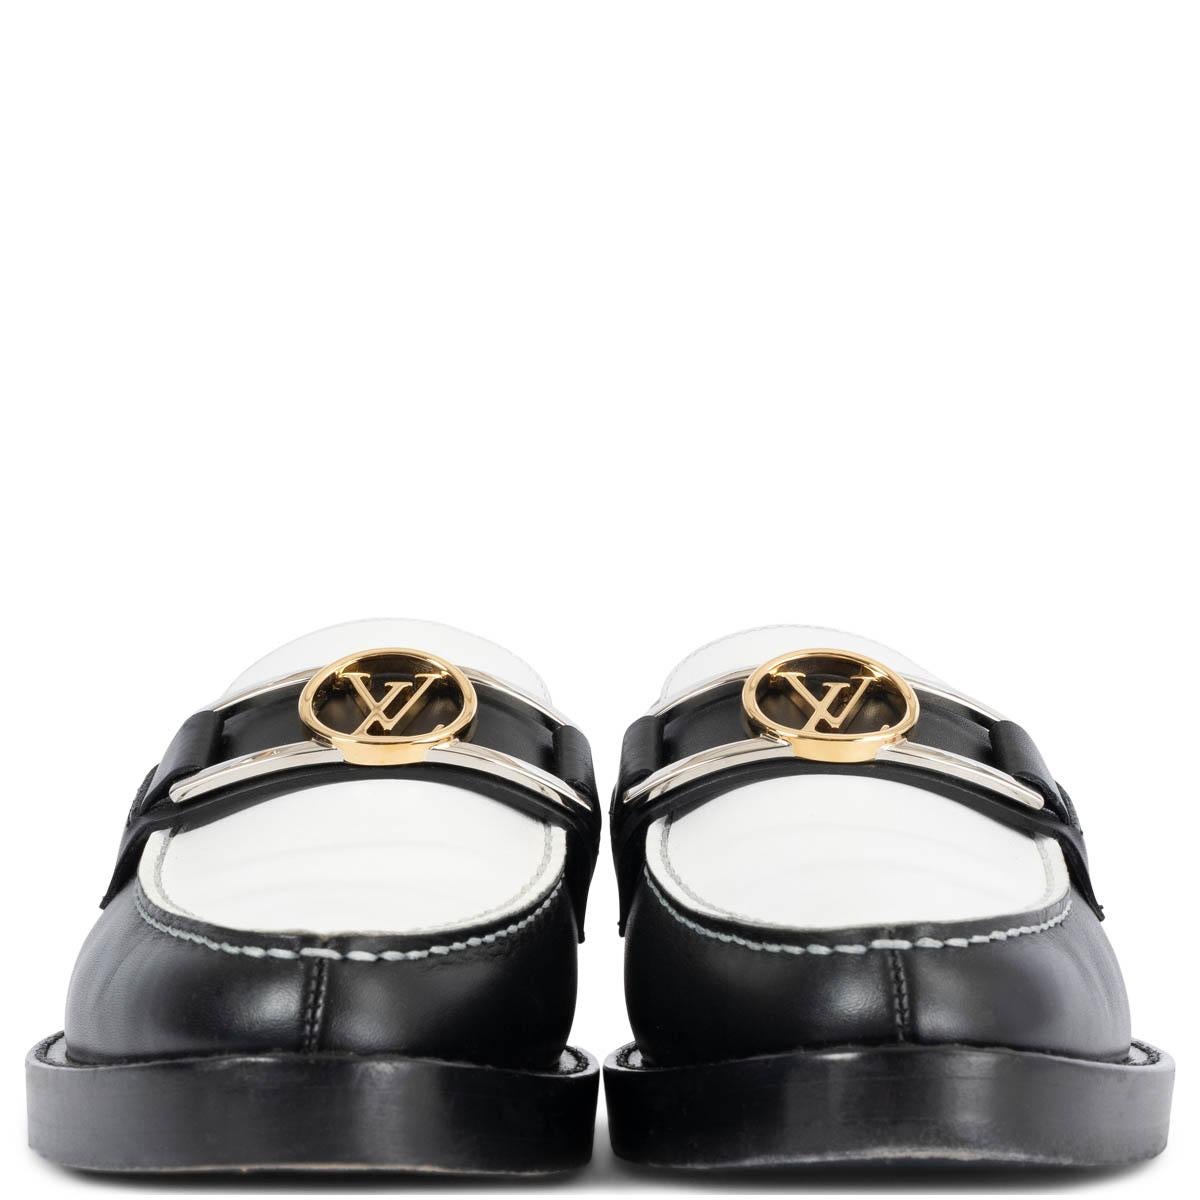 100% authentic Louis Vuitton Academy flat loafer in black and white calf leather brings a chic twist to a boyish classic. It is embellished with an LV accessory in gold- and silver-tone metal, which was inspired by the clasp of the iconic Dauphine